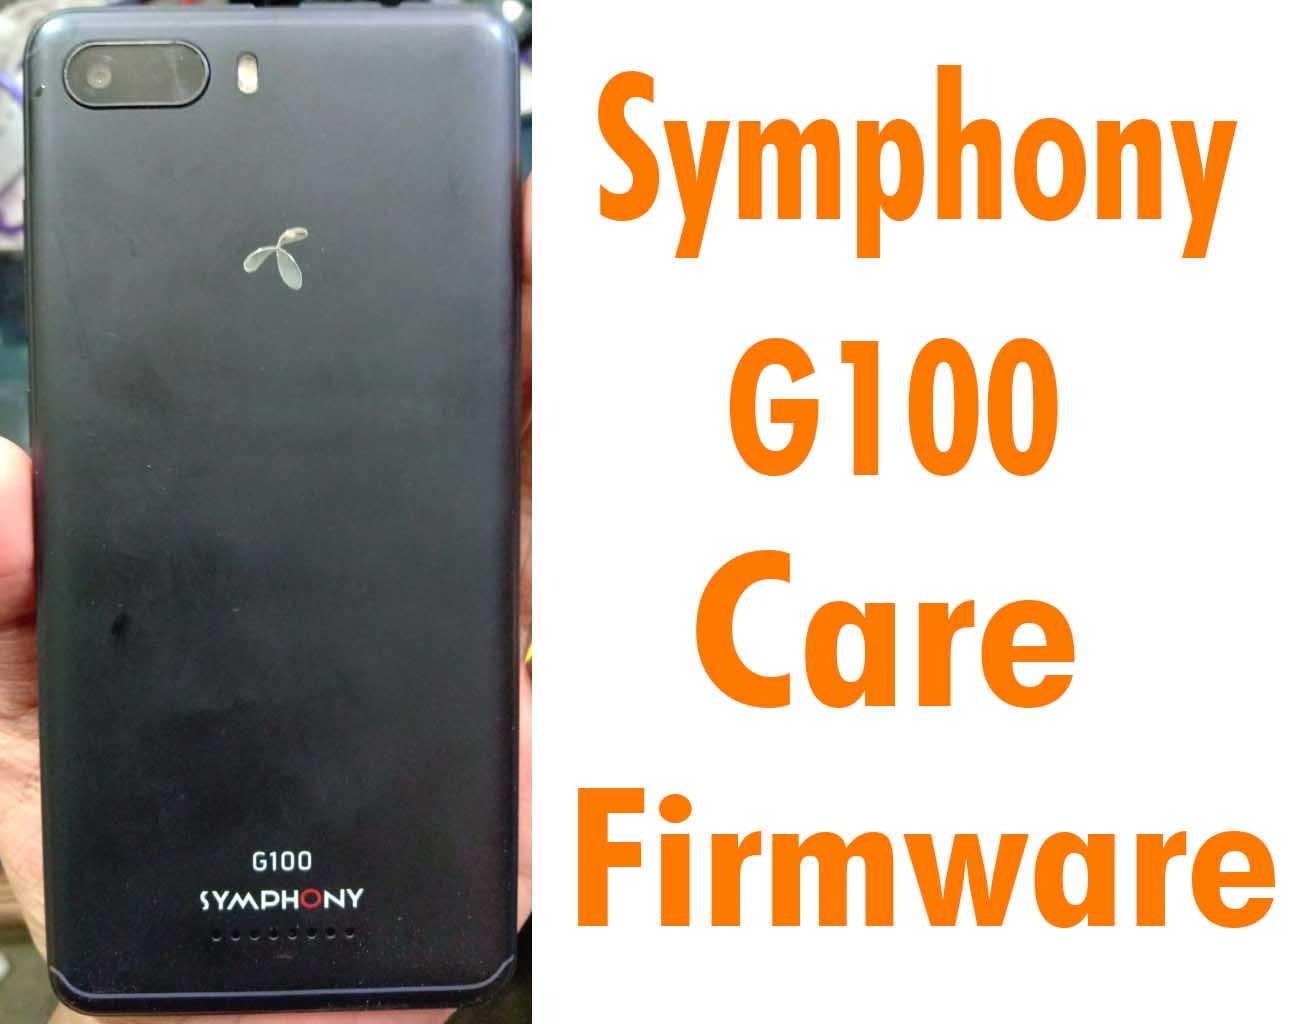 Symphony G100 Flash File Without Password